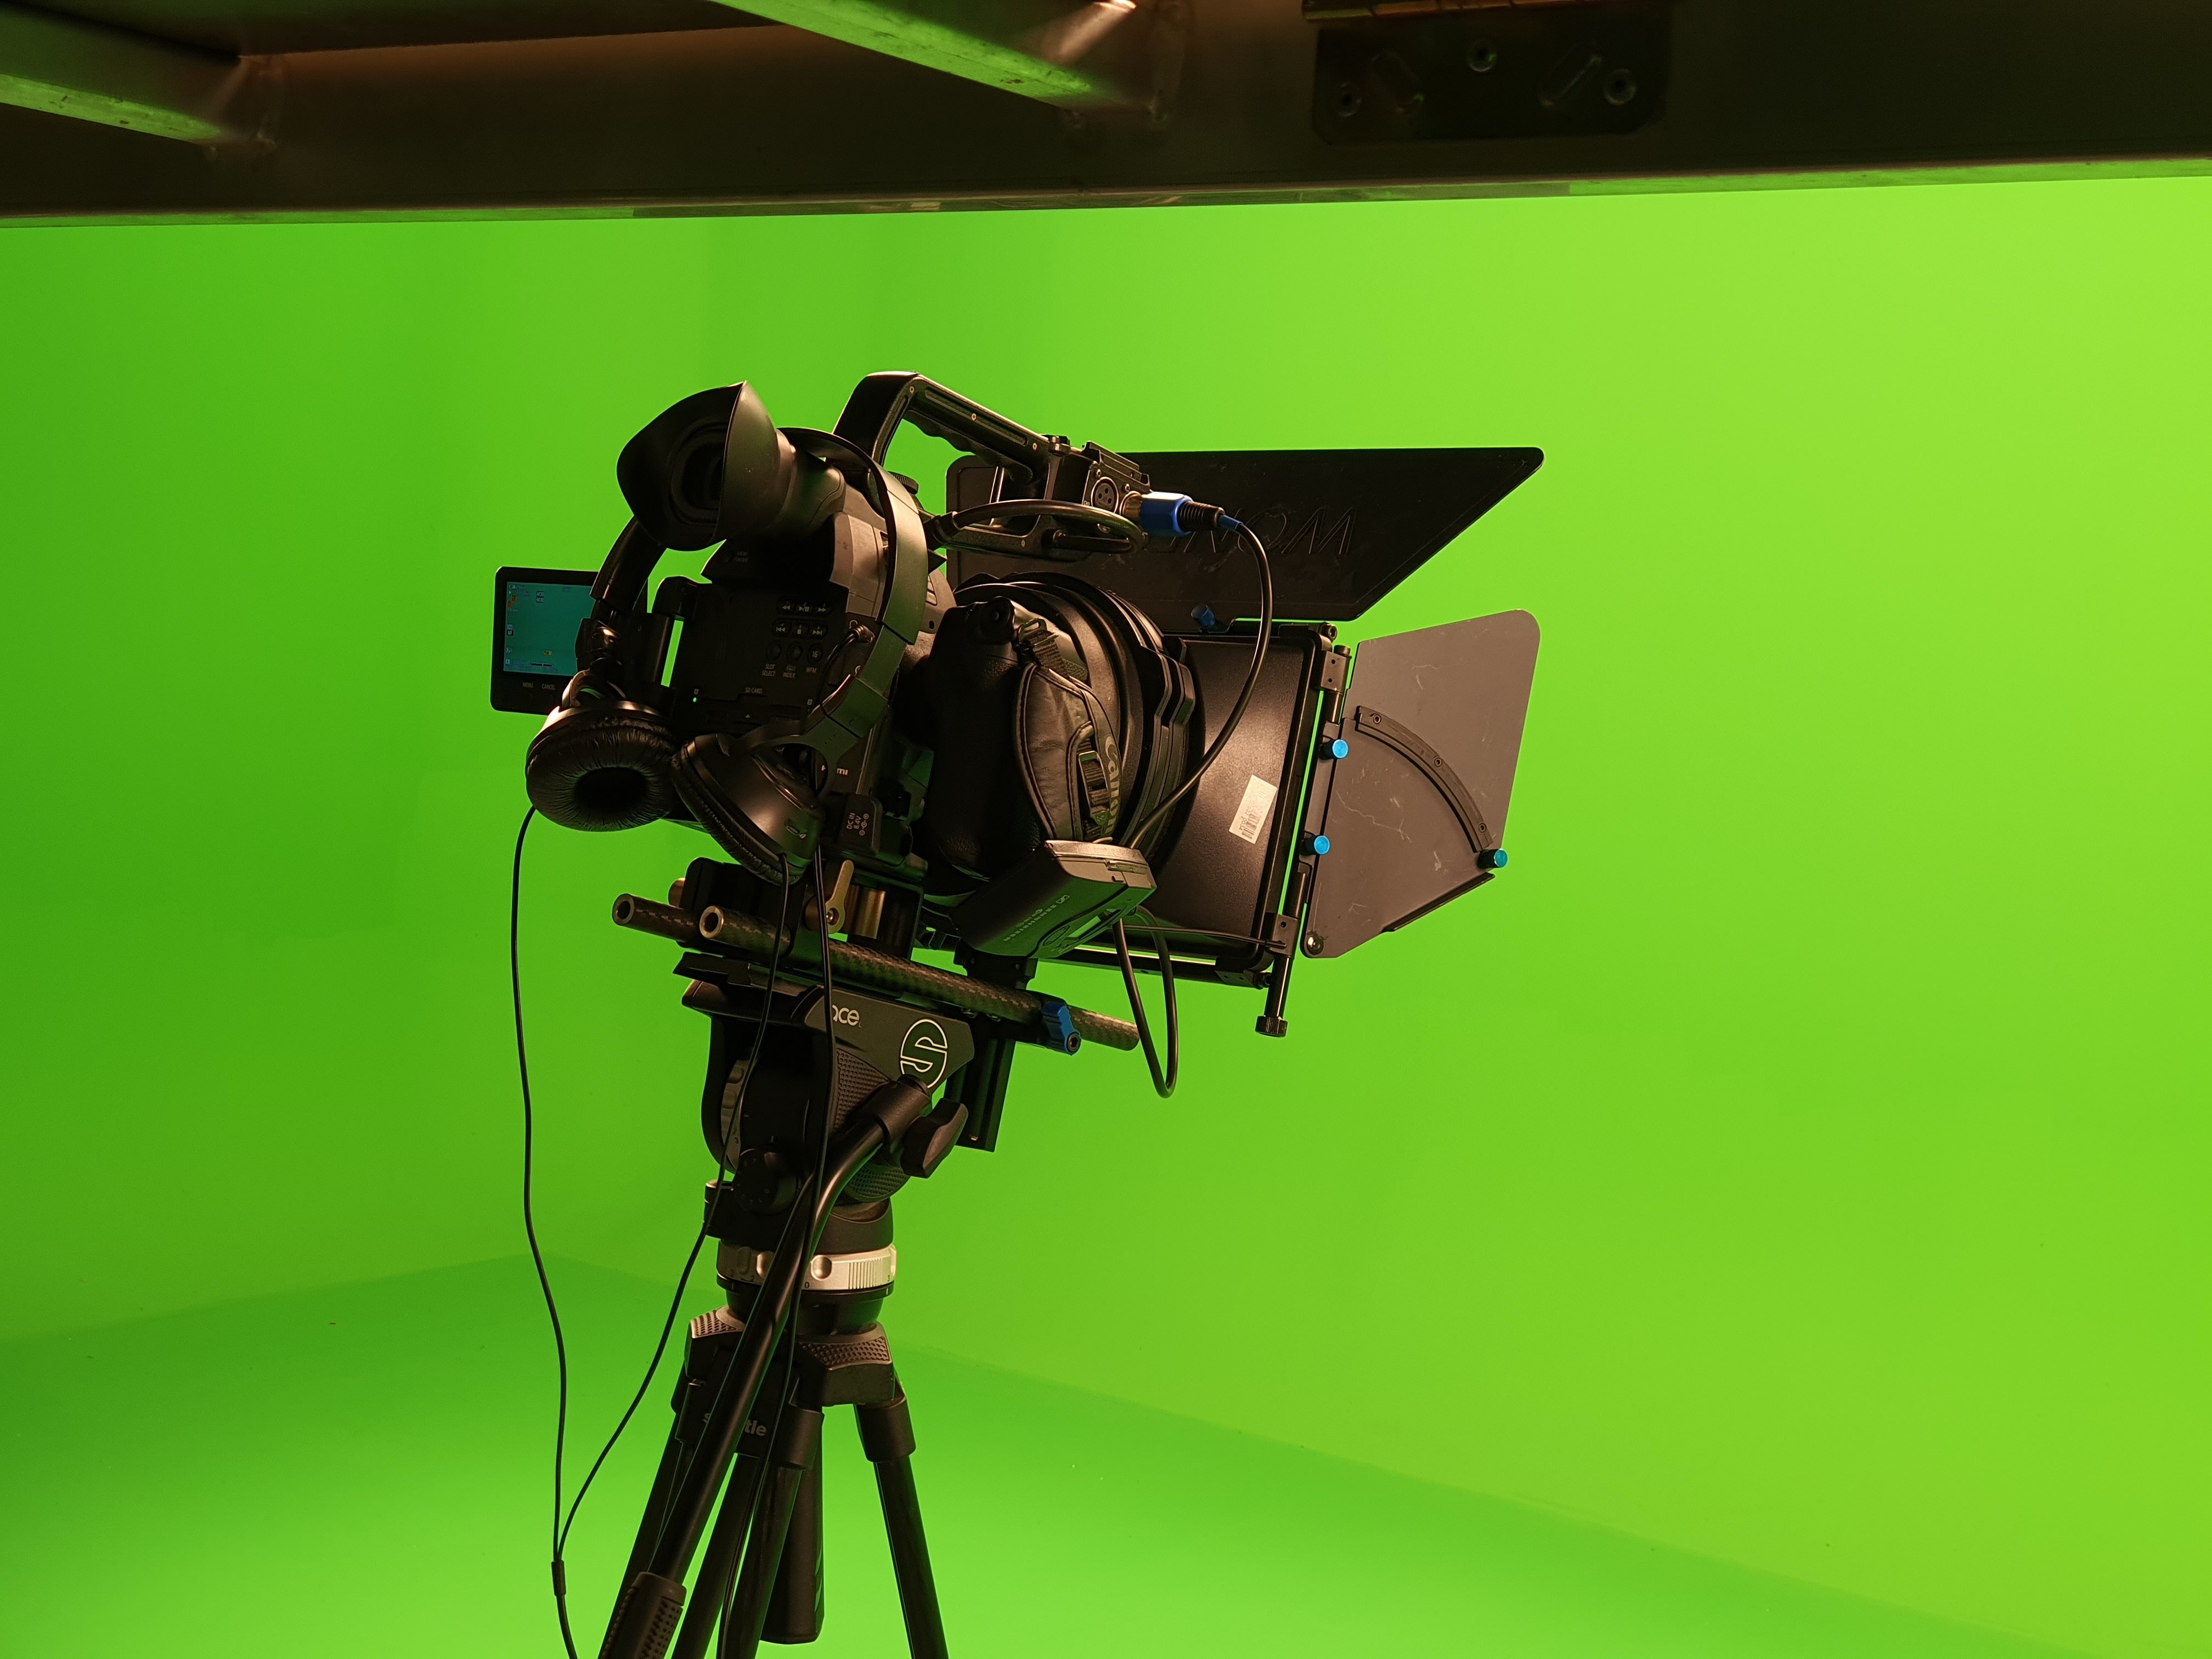 Causes Of Green Screens